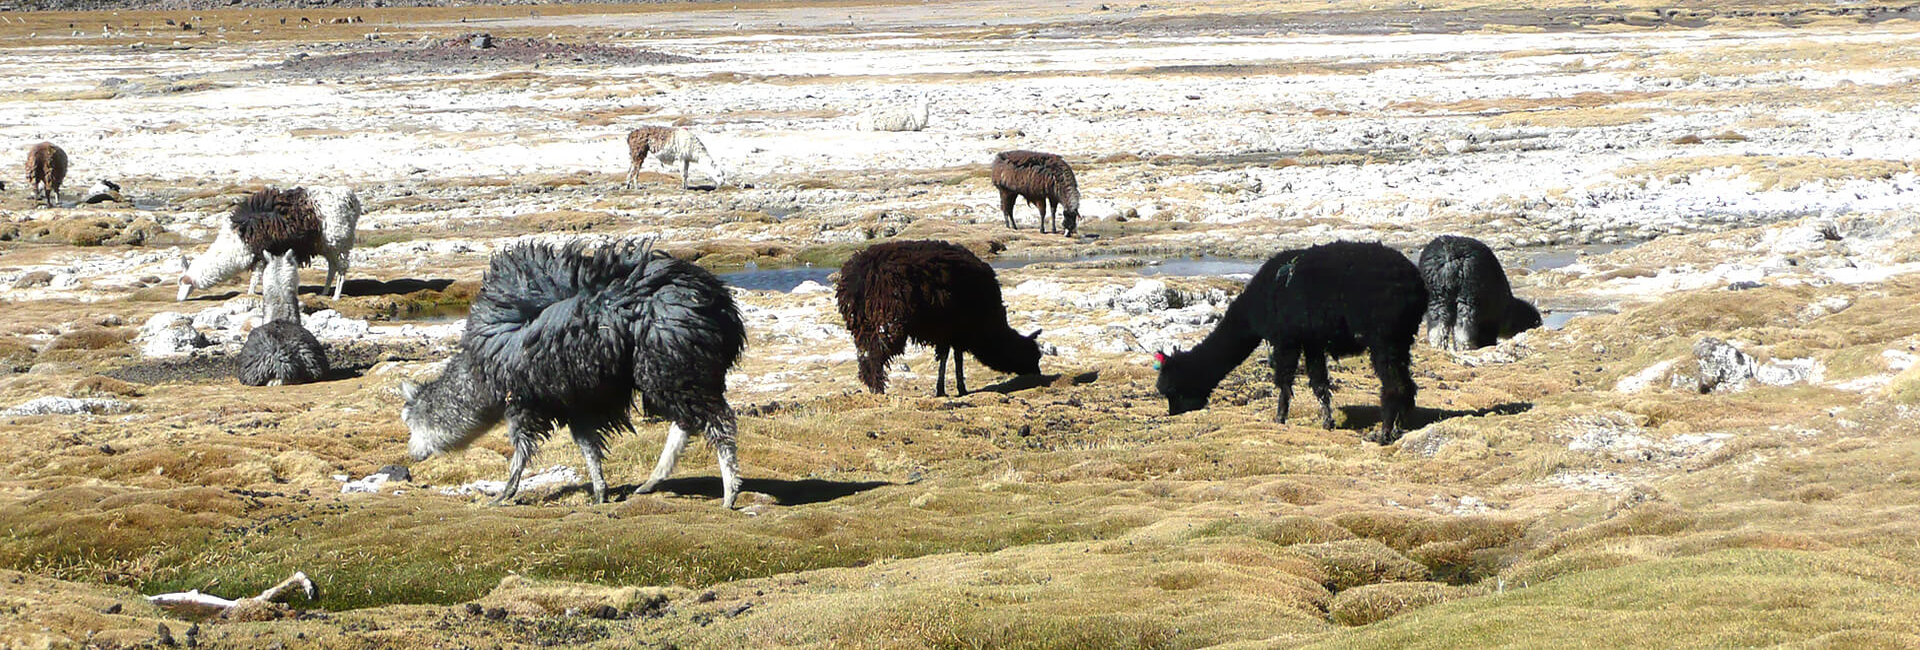 Alpacas in the Altiplano, Chilean Andes